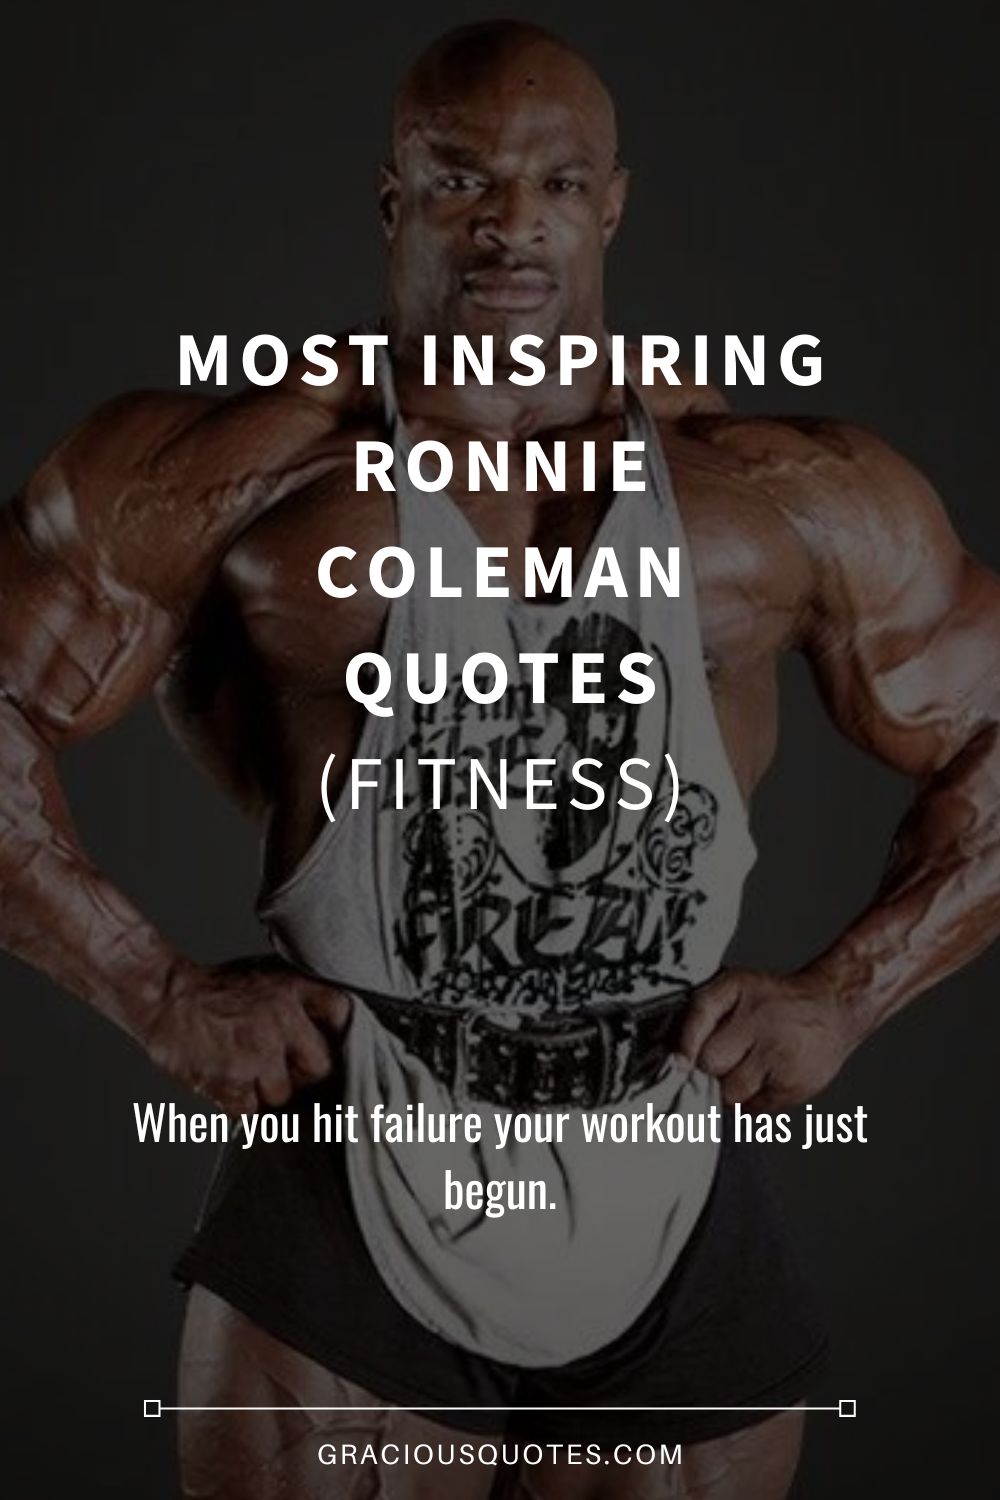 Most Inspiring Ronnie Coleman Quotes (FITNESS) - Gracious Quotes